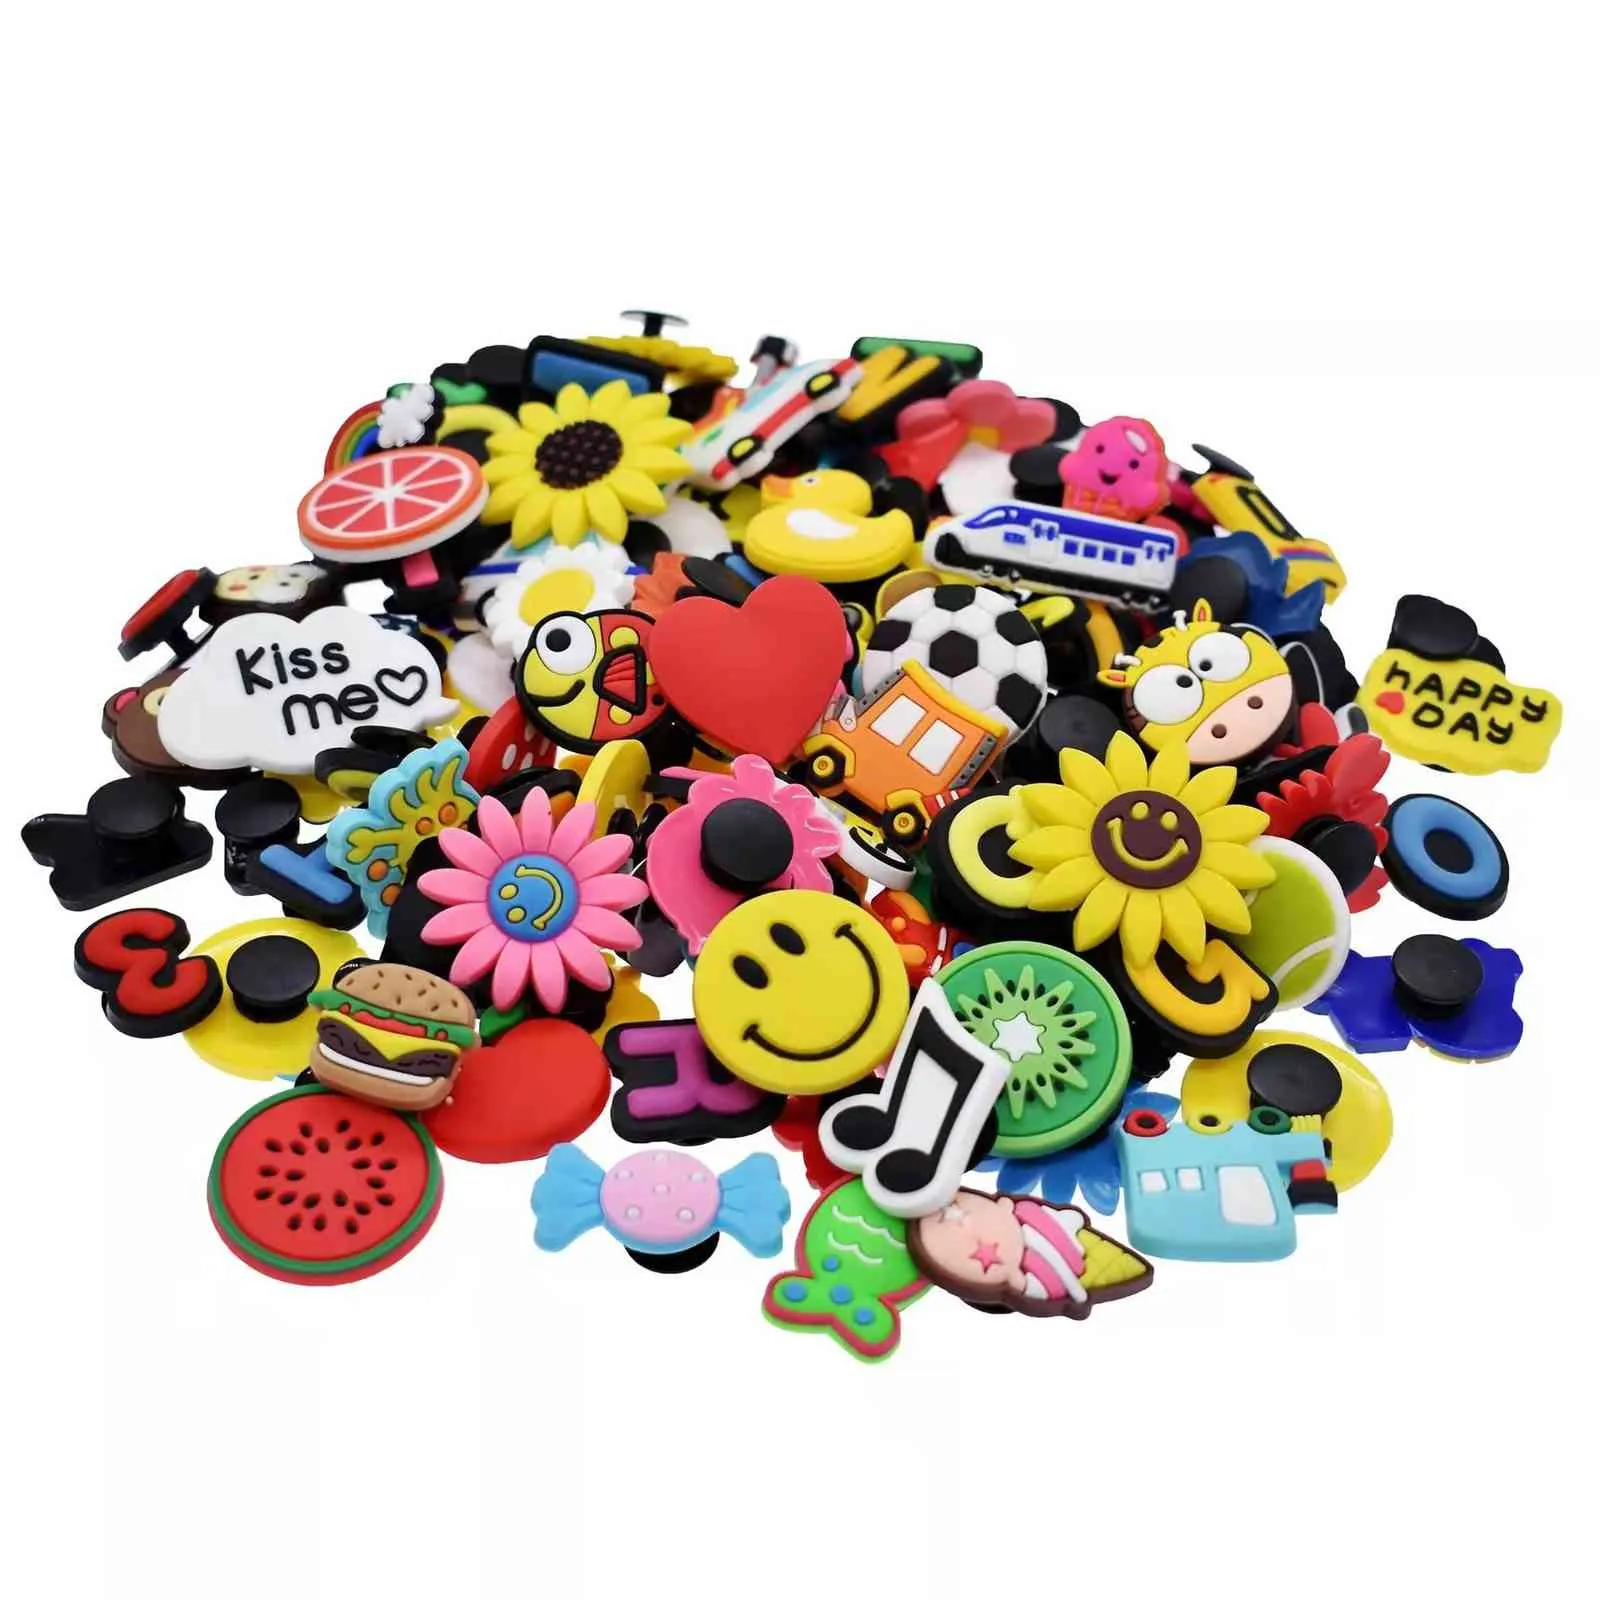 Mix Charm Cartoon Hole Slipper Accessories Croc For Kids Gifts Colorful Letter Animal Monkey Shoes Charms Buckles